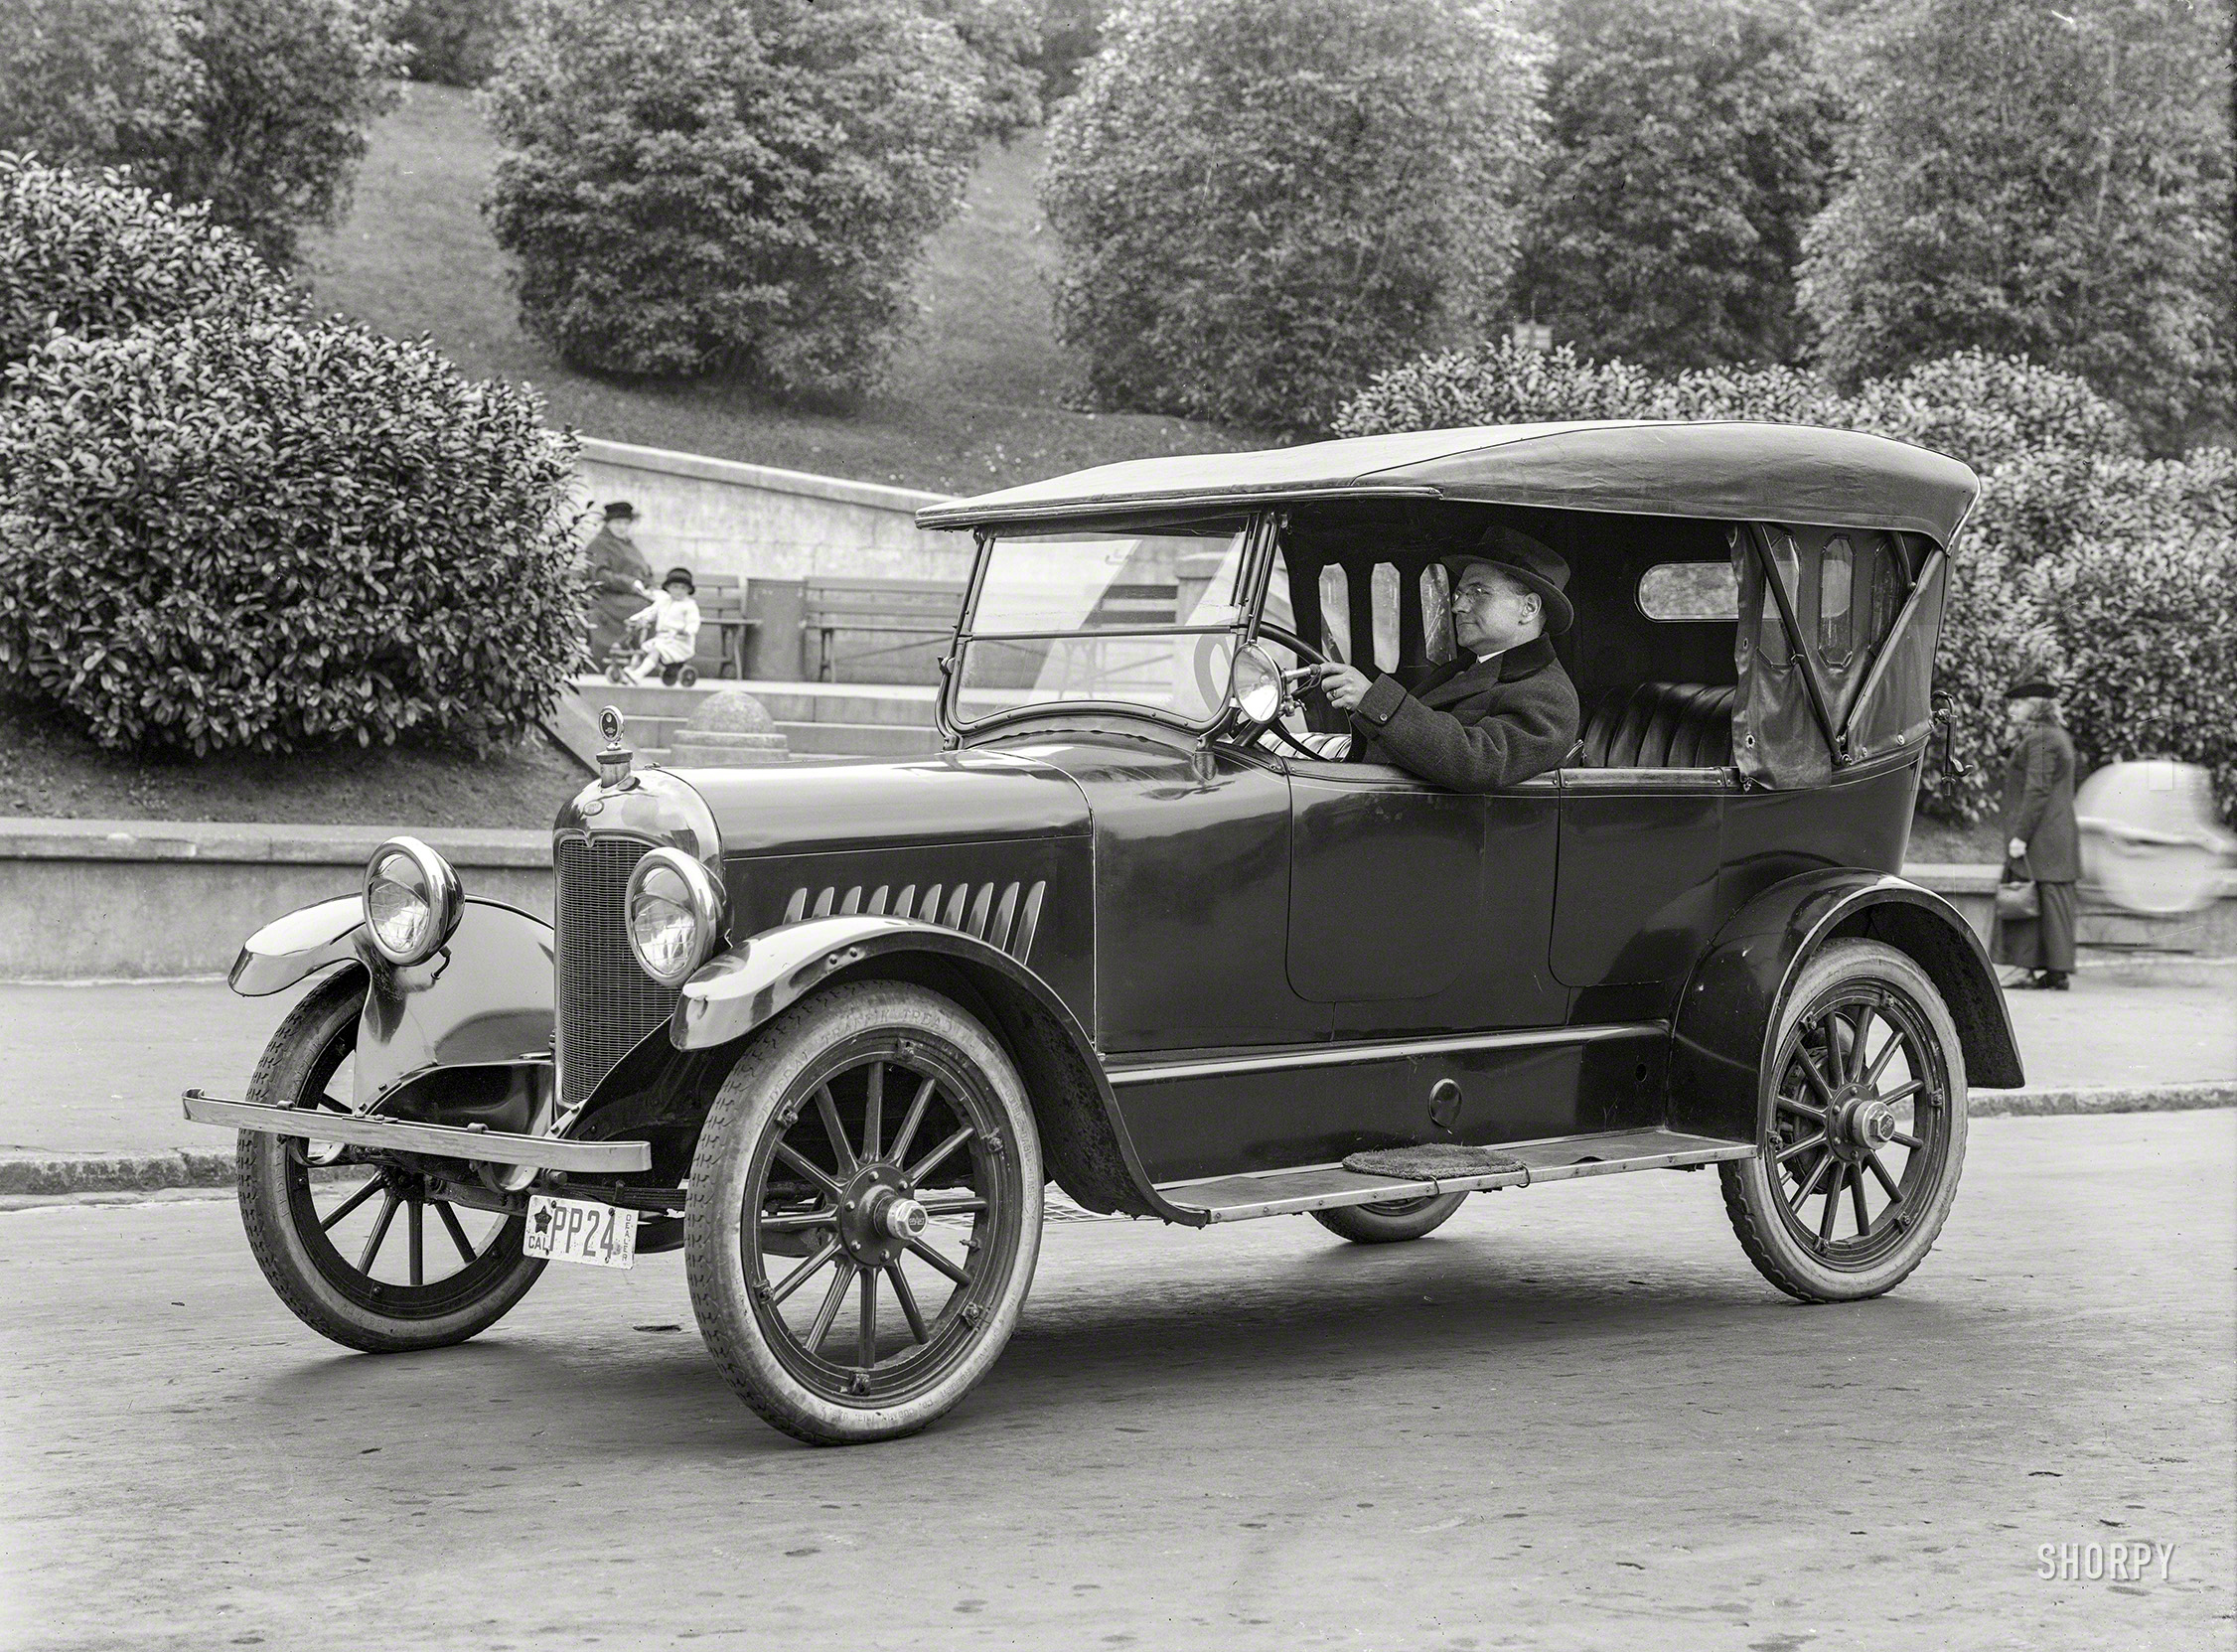 San Francisco, 1919. "Grant Six touring car at Alta Plaza Park." Manifesting a variety of conveyances for young and old, in this latest psalm from the Shorpy Bible of Bygone Buggies. (Footnote: running-board doormat.) View full size.